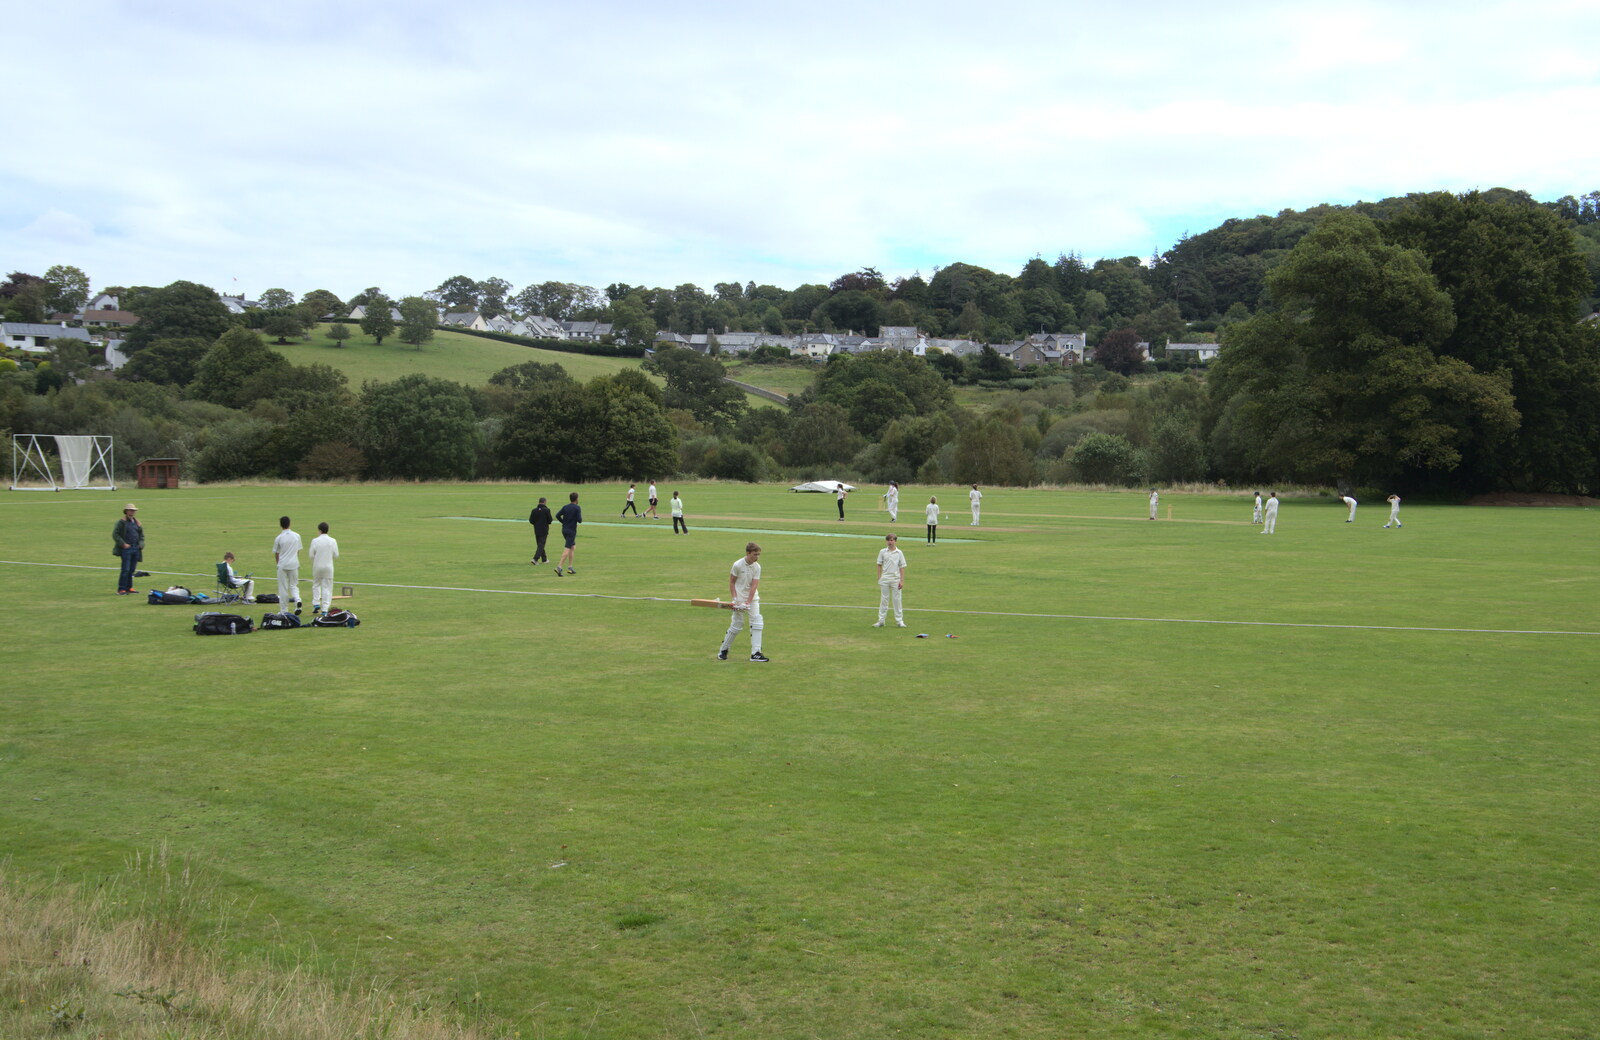 A game of cricket occurs from A Game of Cricket, and a Walk Around Chagford, Devon - 23rd August 2020